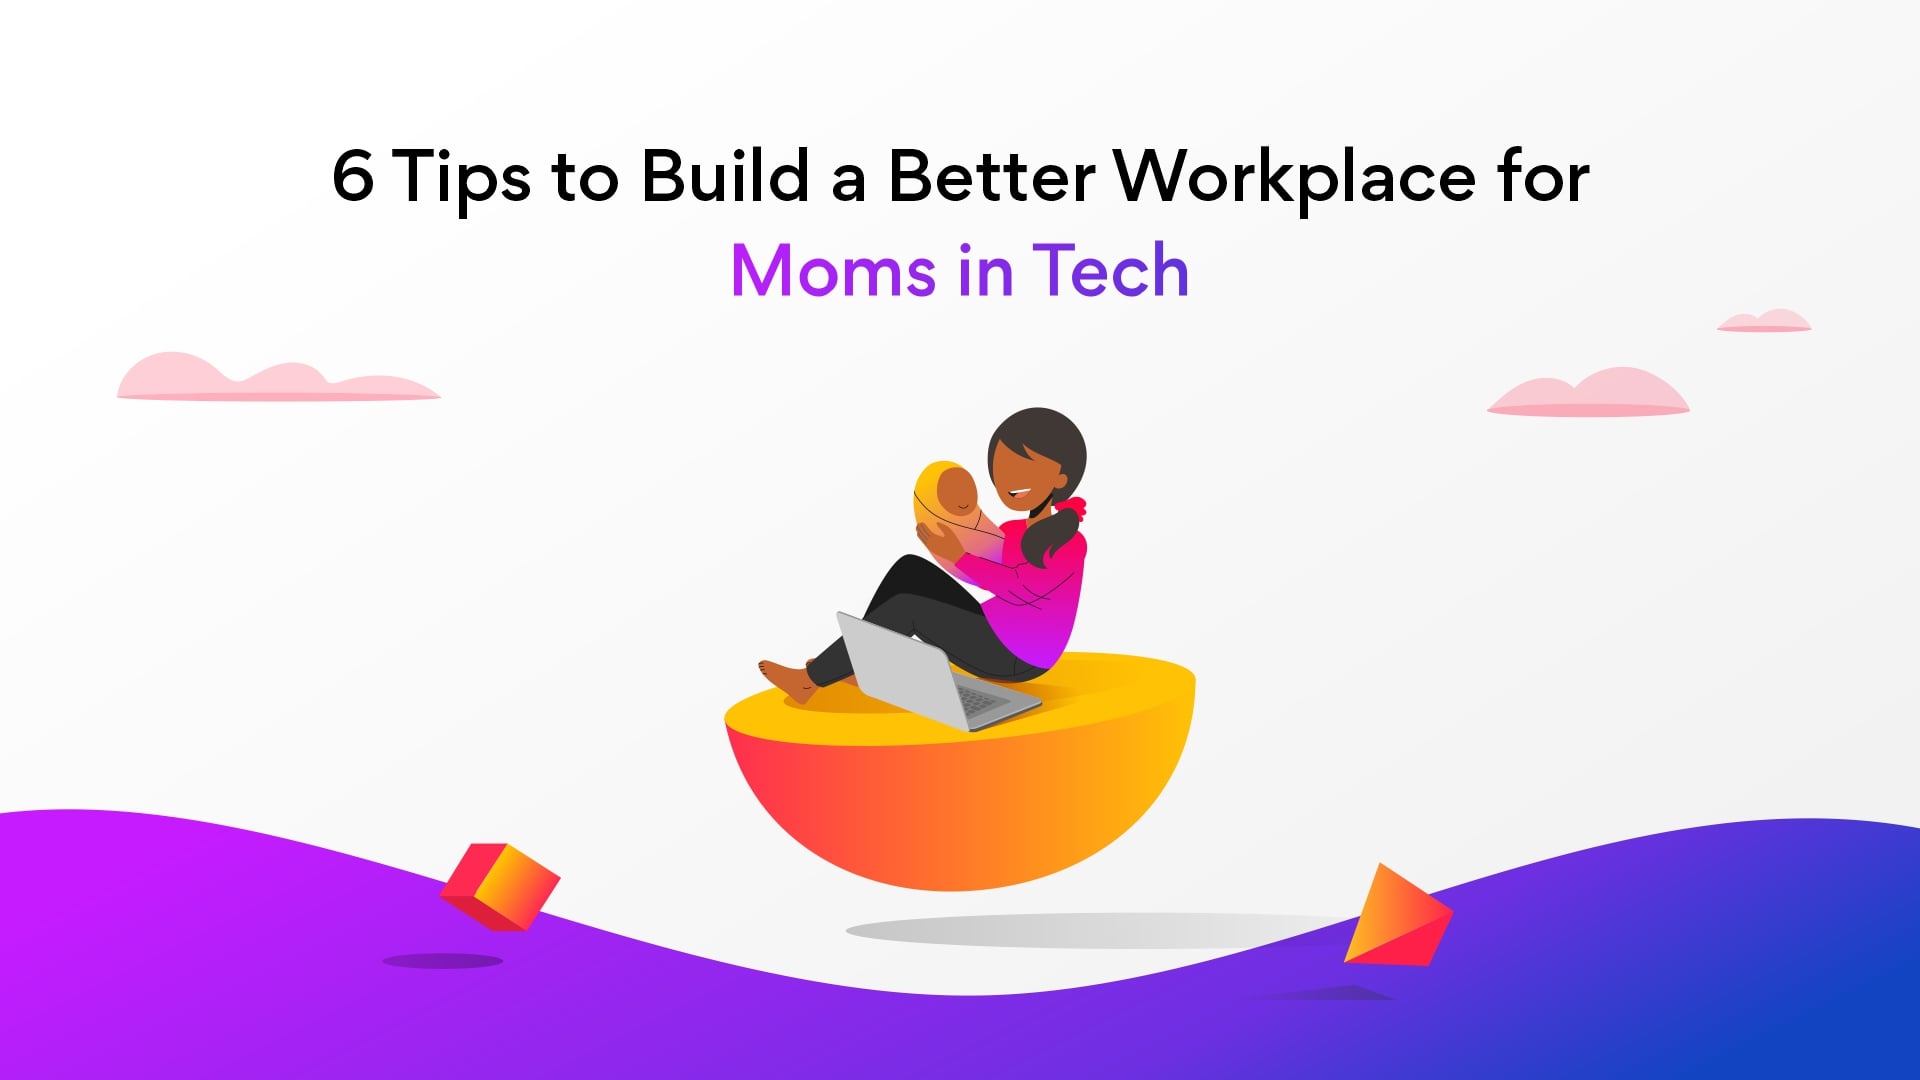 Moms in Tech: 6 Tips to Build a Better Workplace for Tech Moms